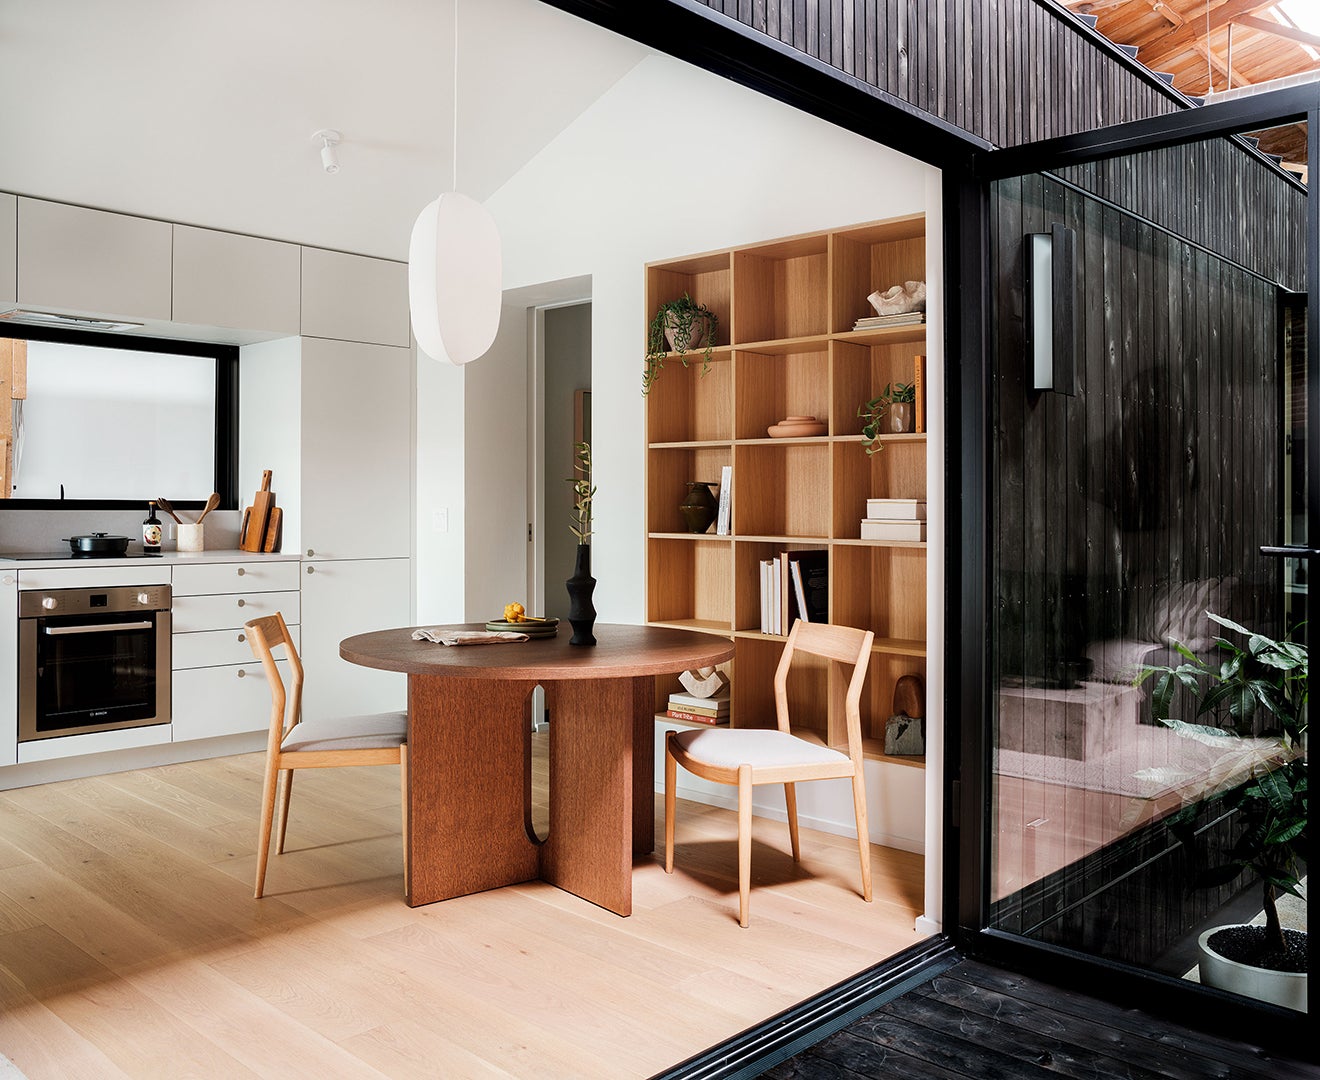 There’s a New Prefab ADU on the Block, and Its Kitchen Is Nicer Than Most Homes